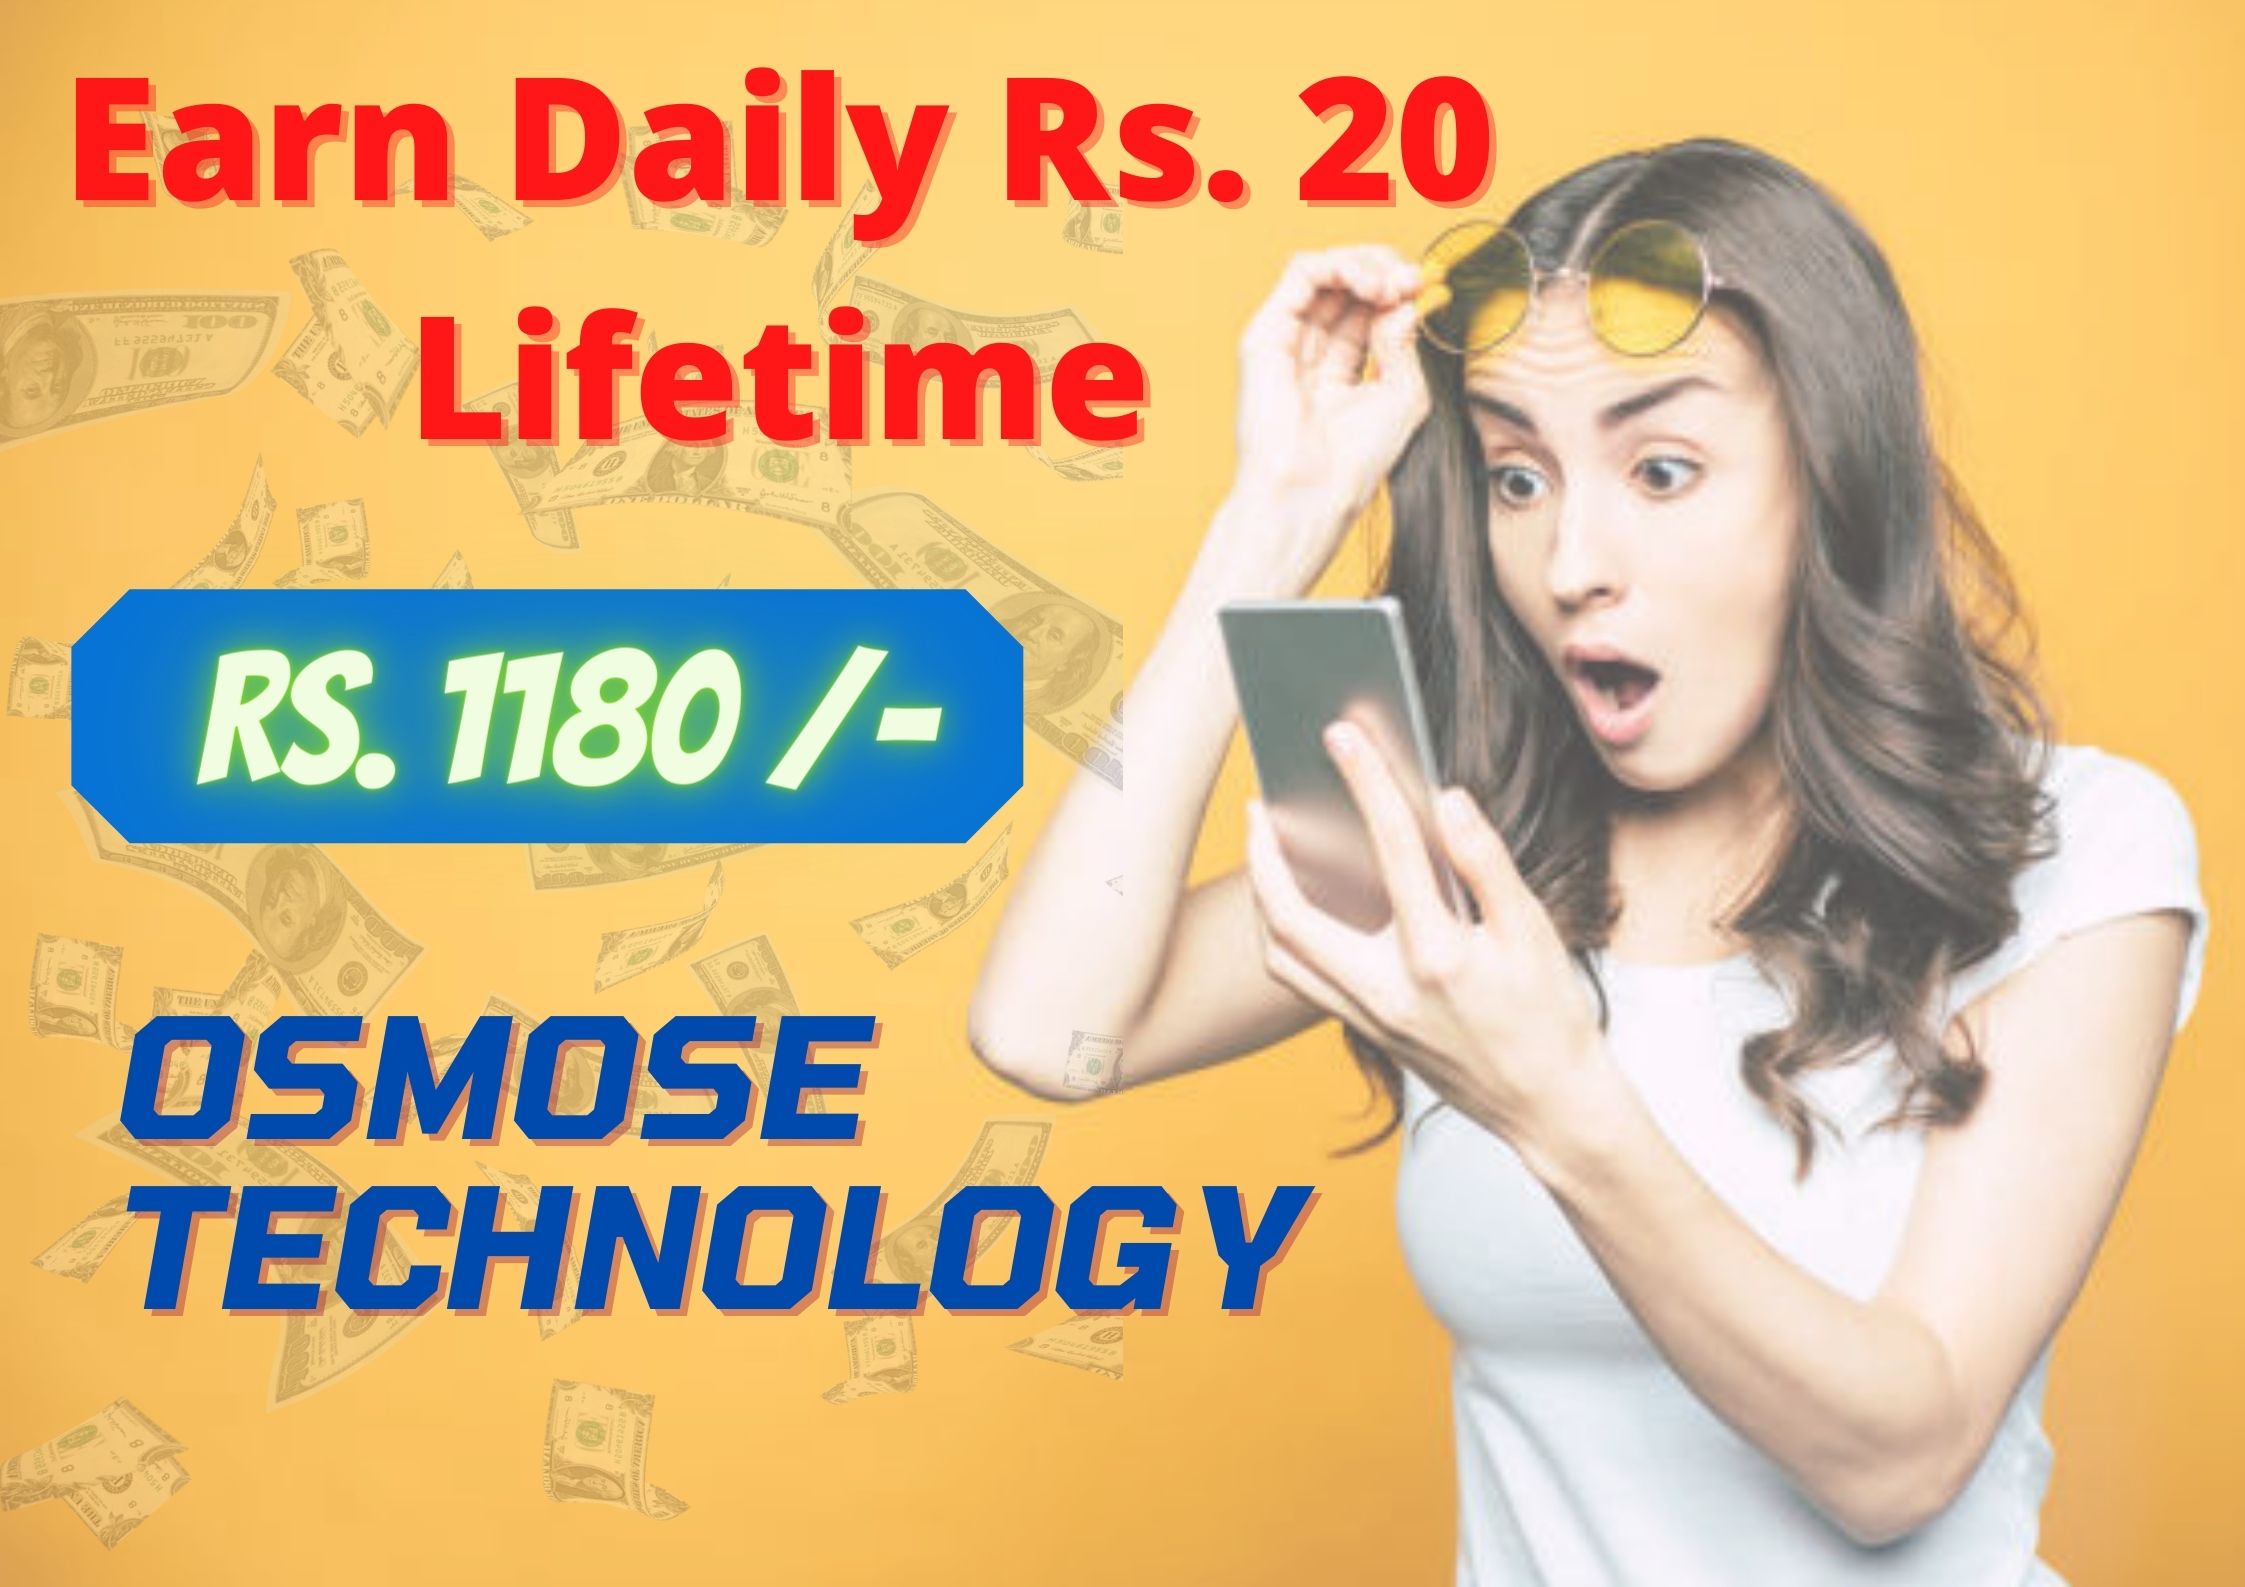 Osmose-Technology-pvt-ltd-Fake or Real